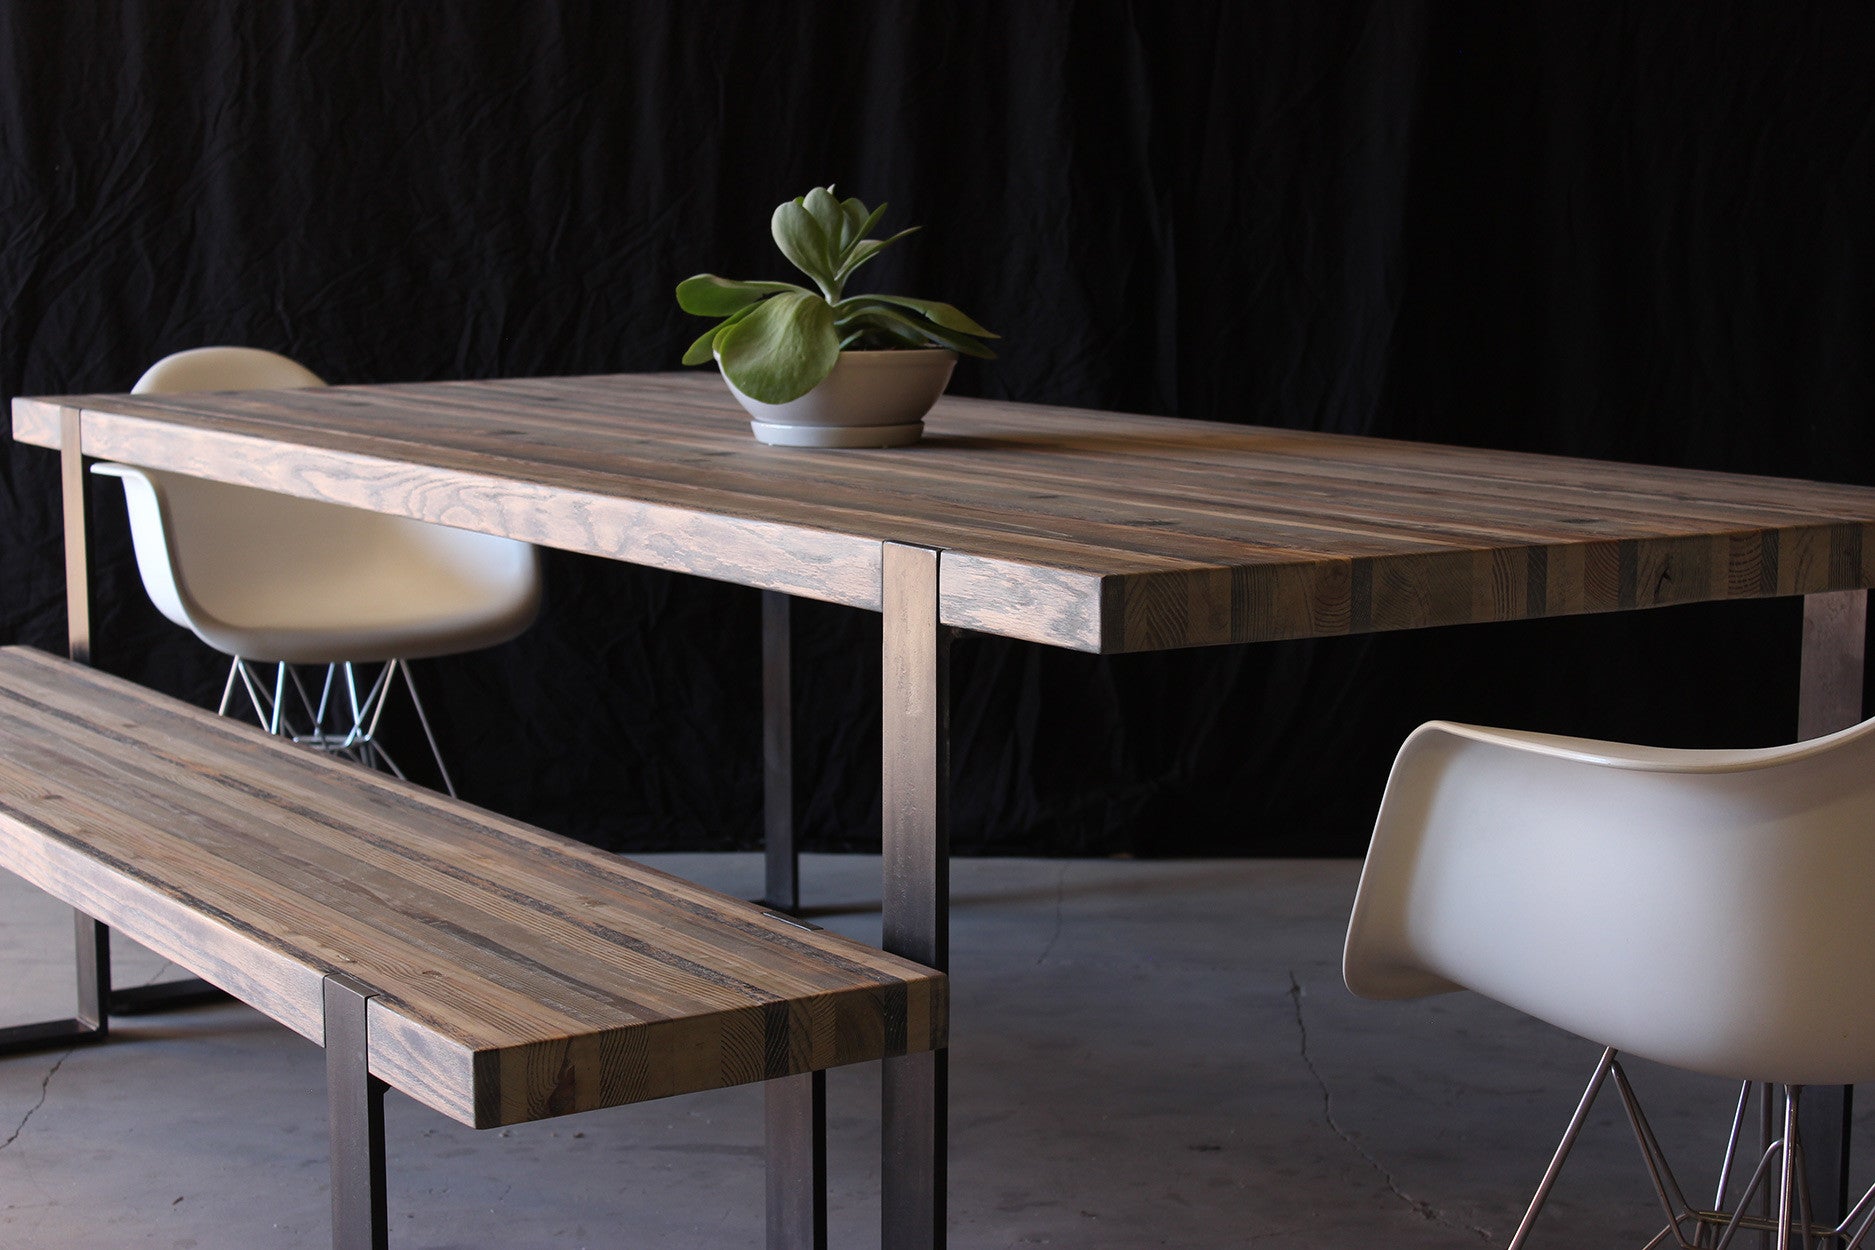 8' original dining table | aged wood finish with waxed steel